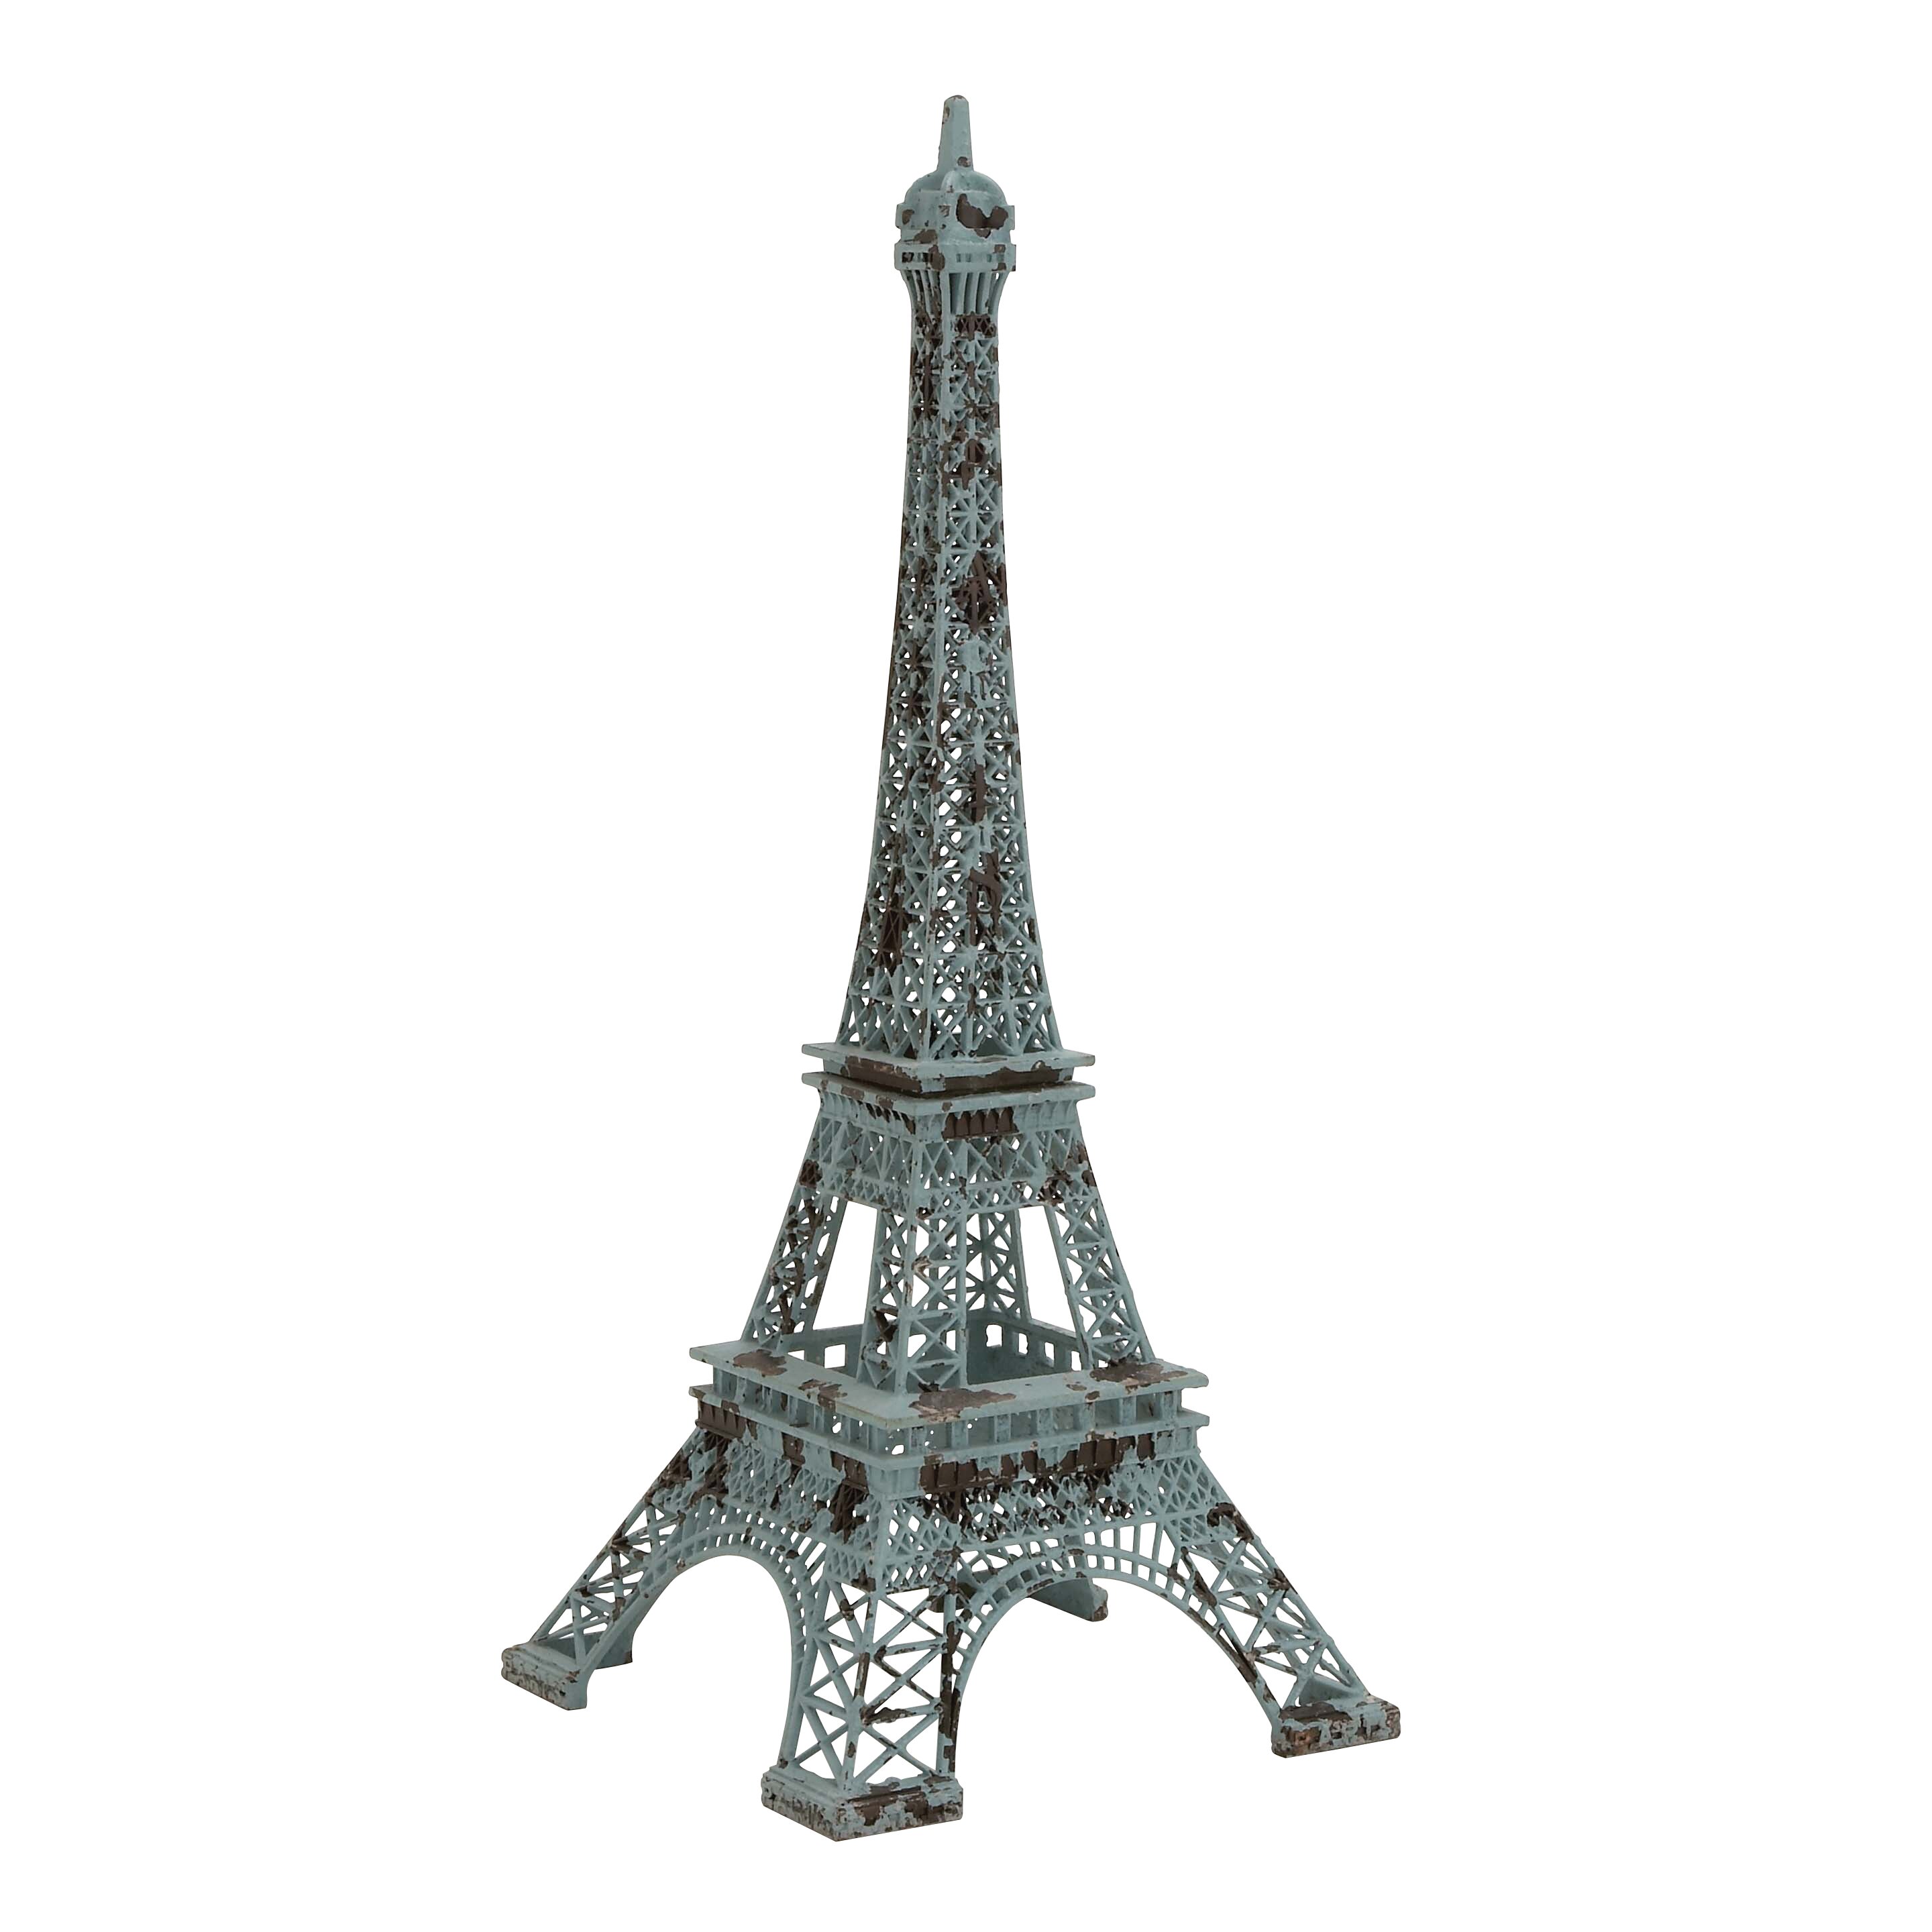 Woodland Imports The Charming Metal Decorative Eiffel Tower Sculpture